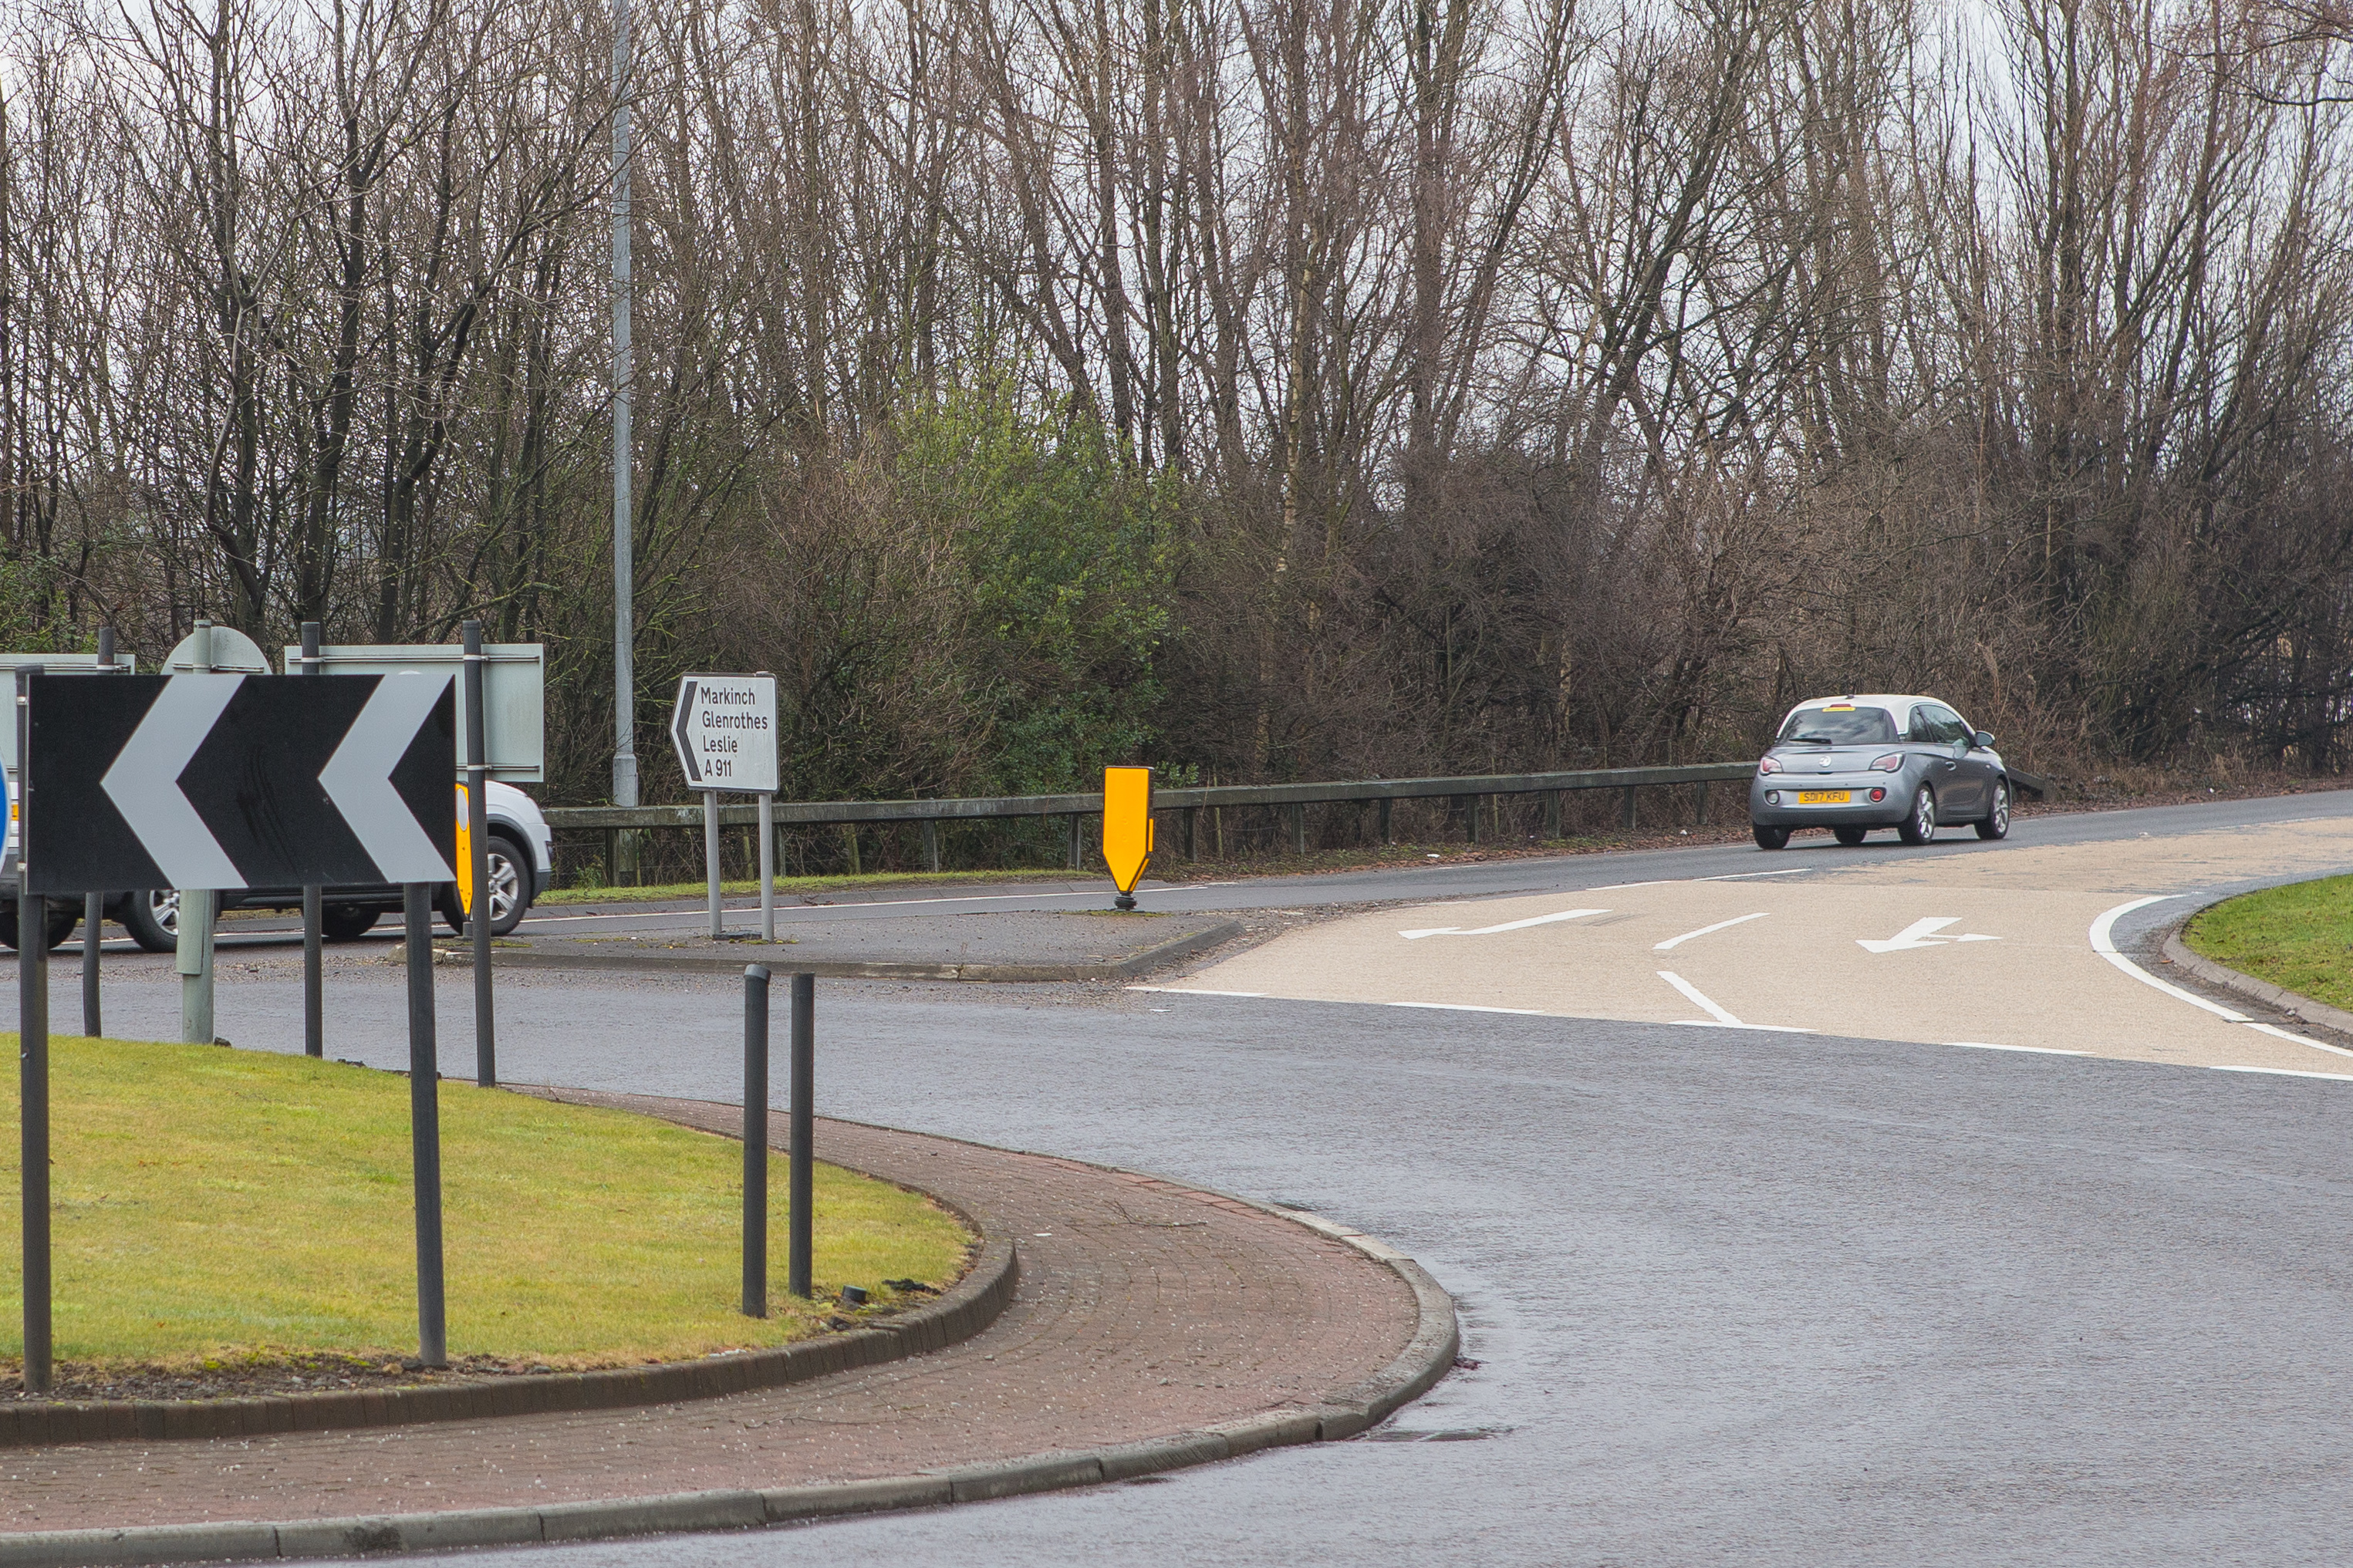 The roundabout near where a pedestrian died in an acident.